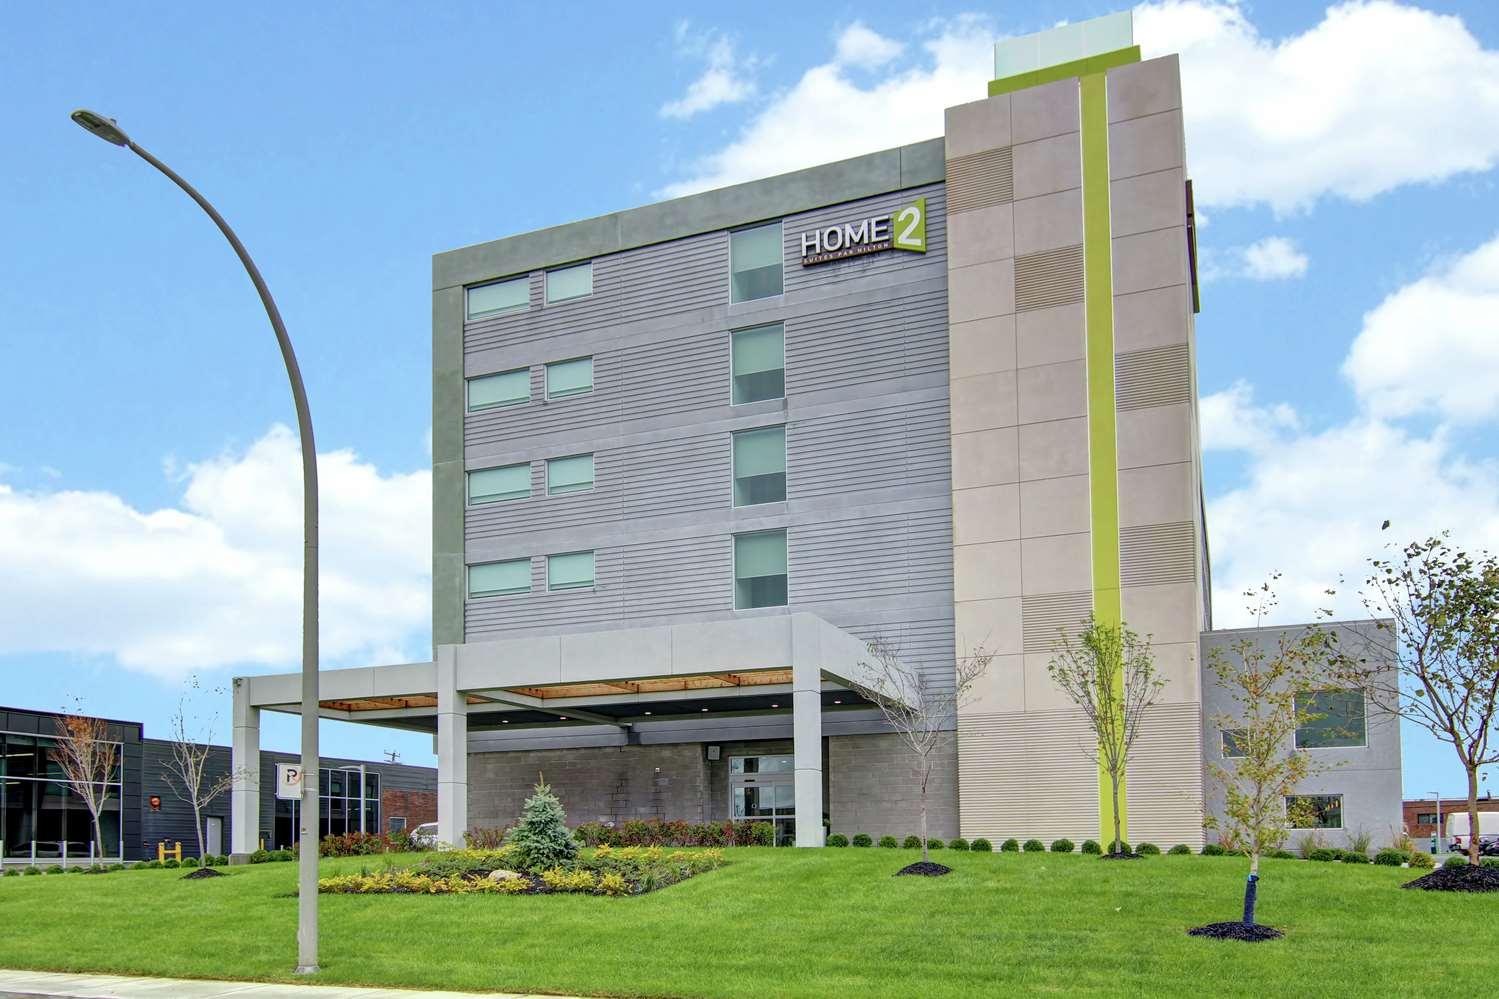 Home2 Suites by Hilton Montreal Dorval in Dorval, QC